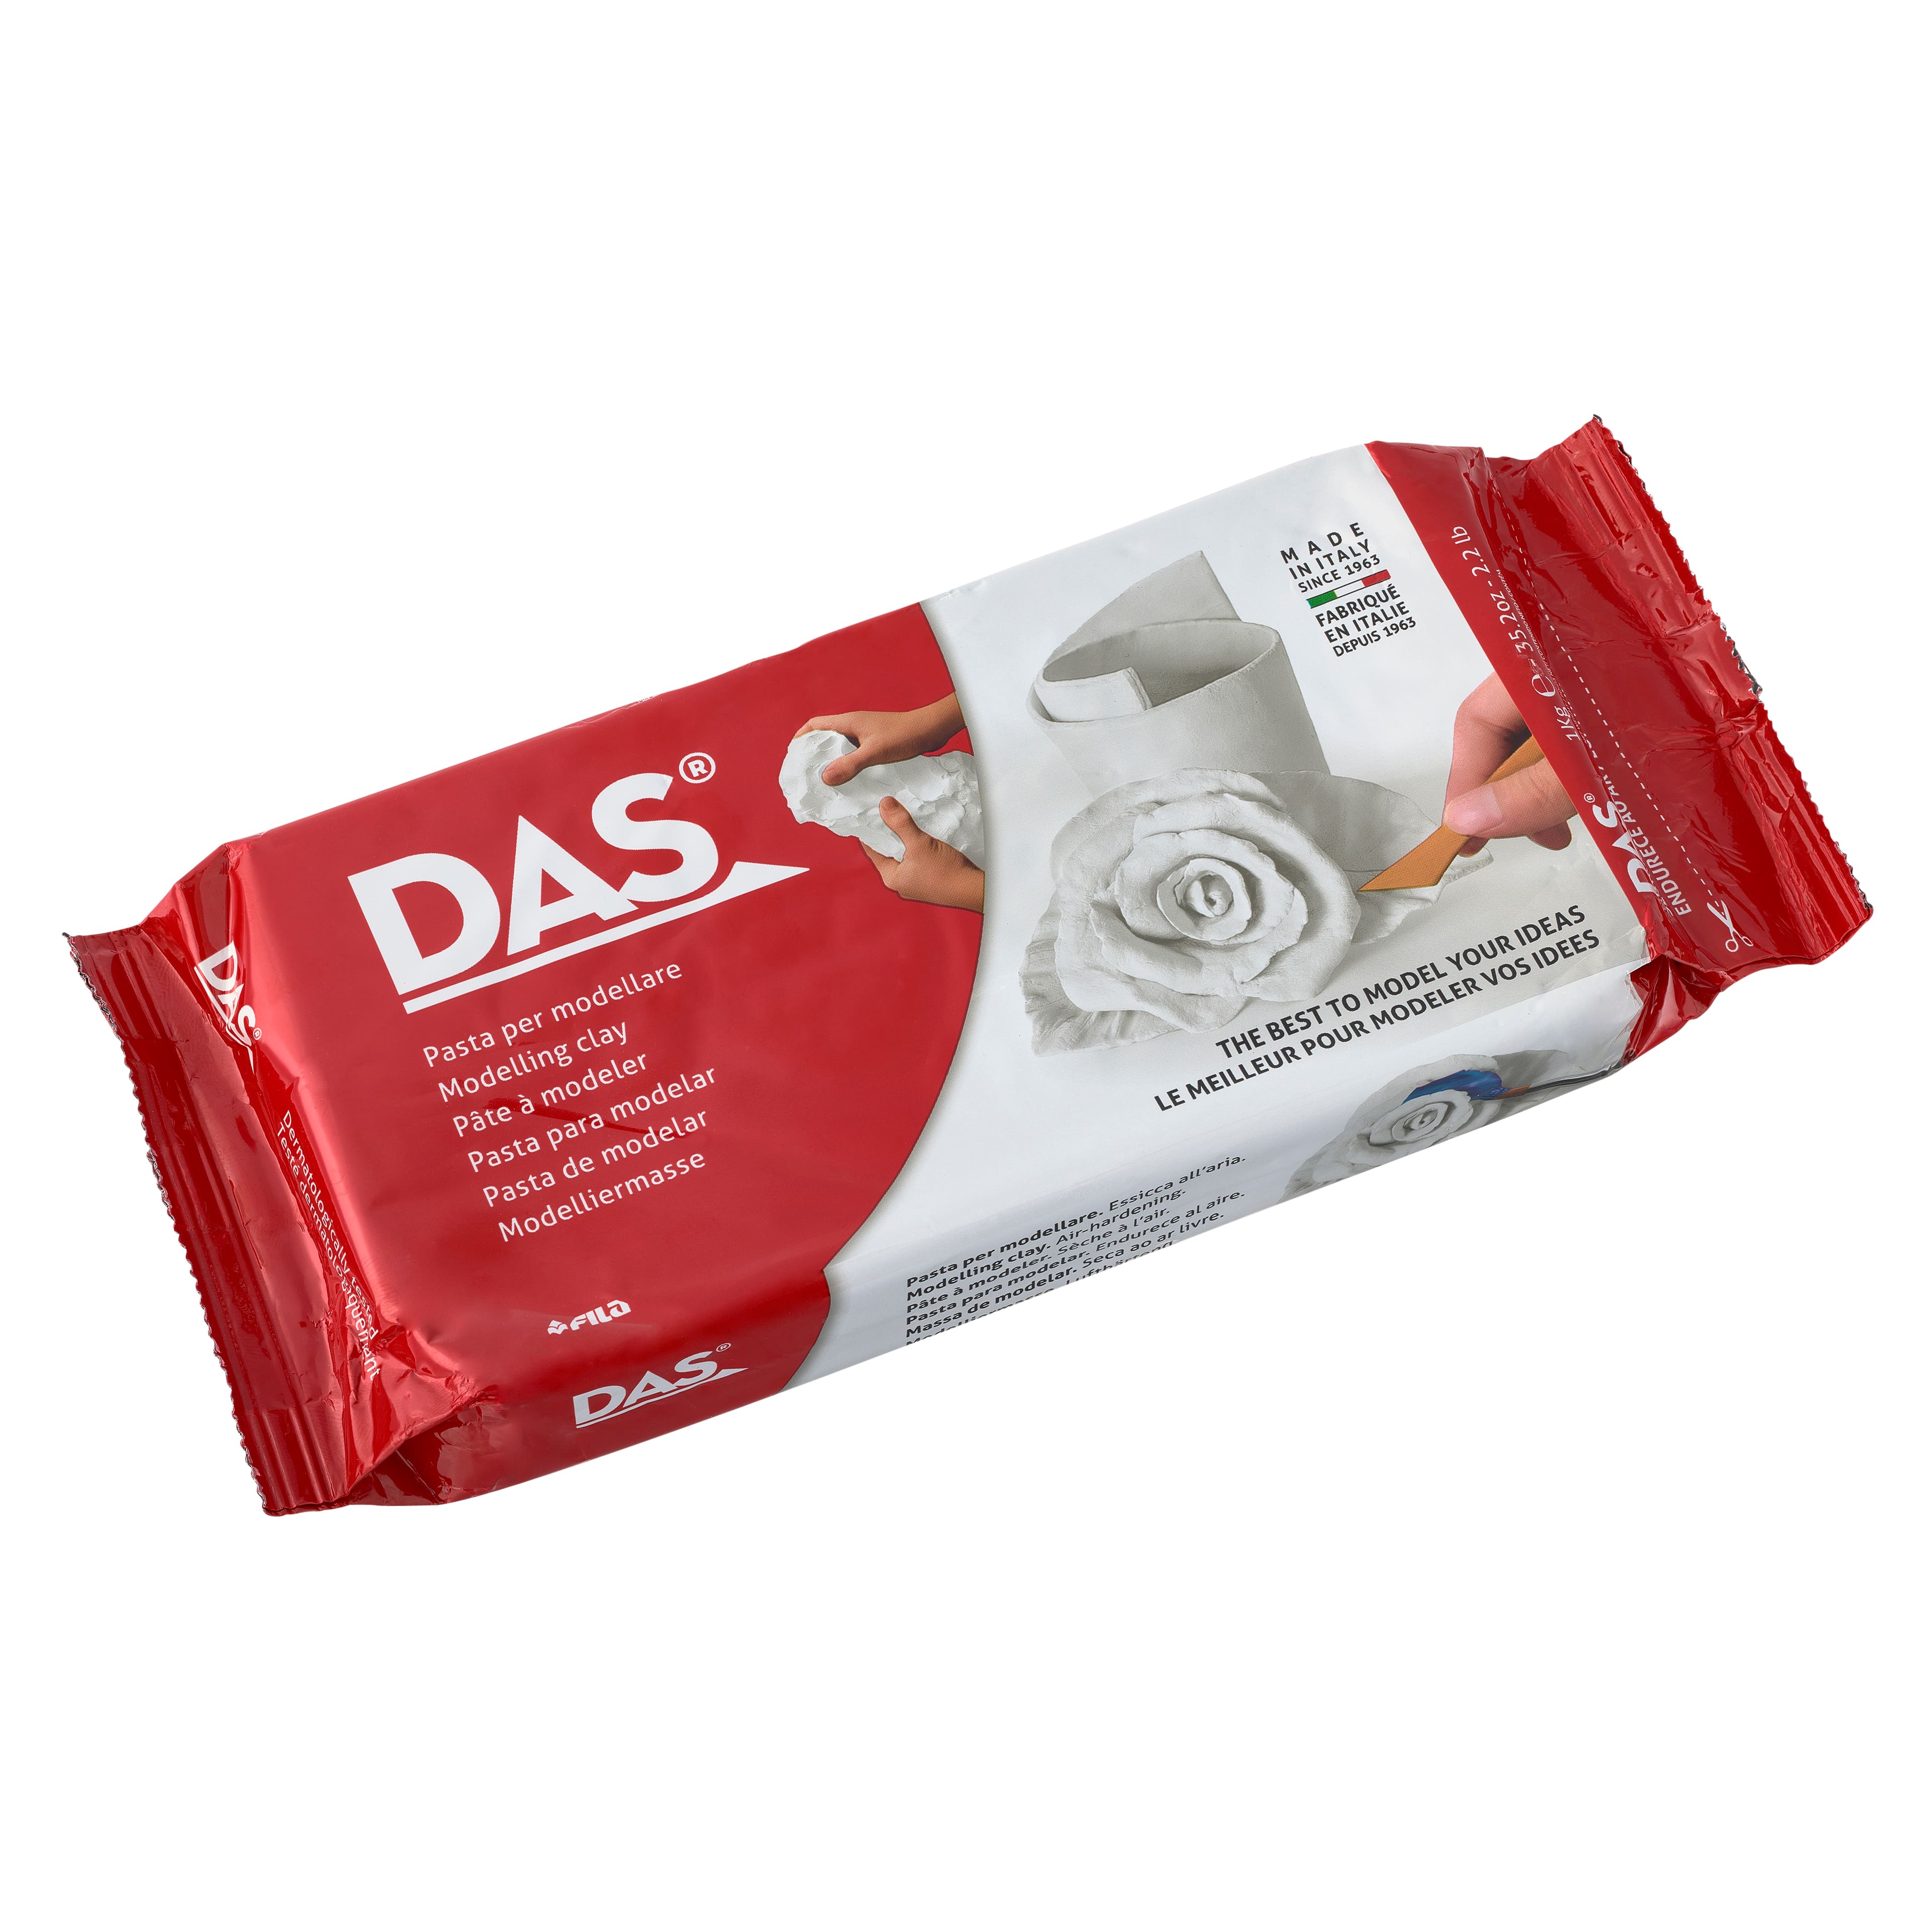 DAS Air Hardening Modeling Clay, White, 2.2 lb Per Pack, 2 Packs